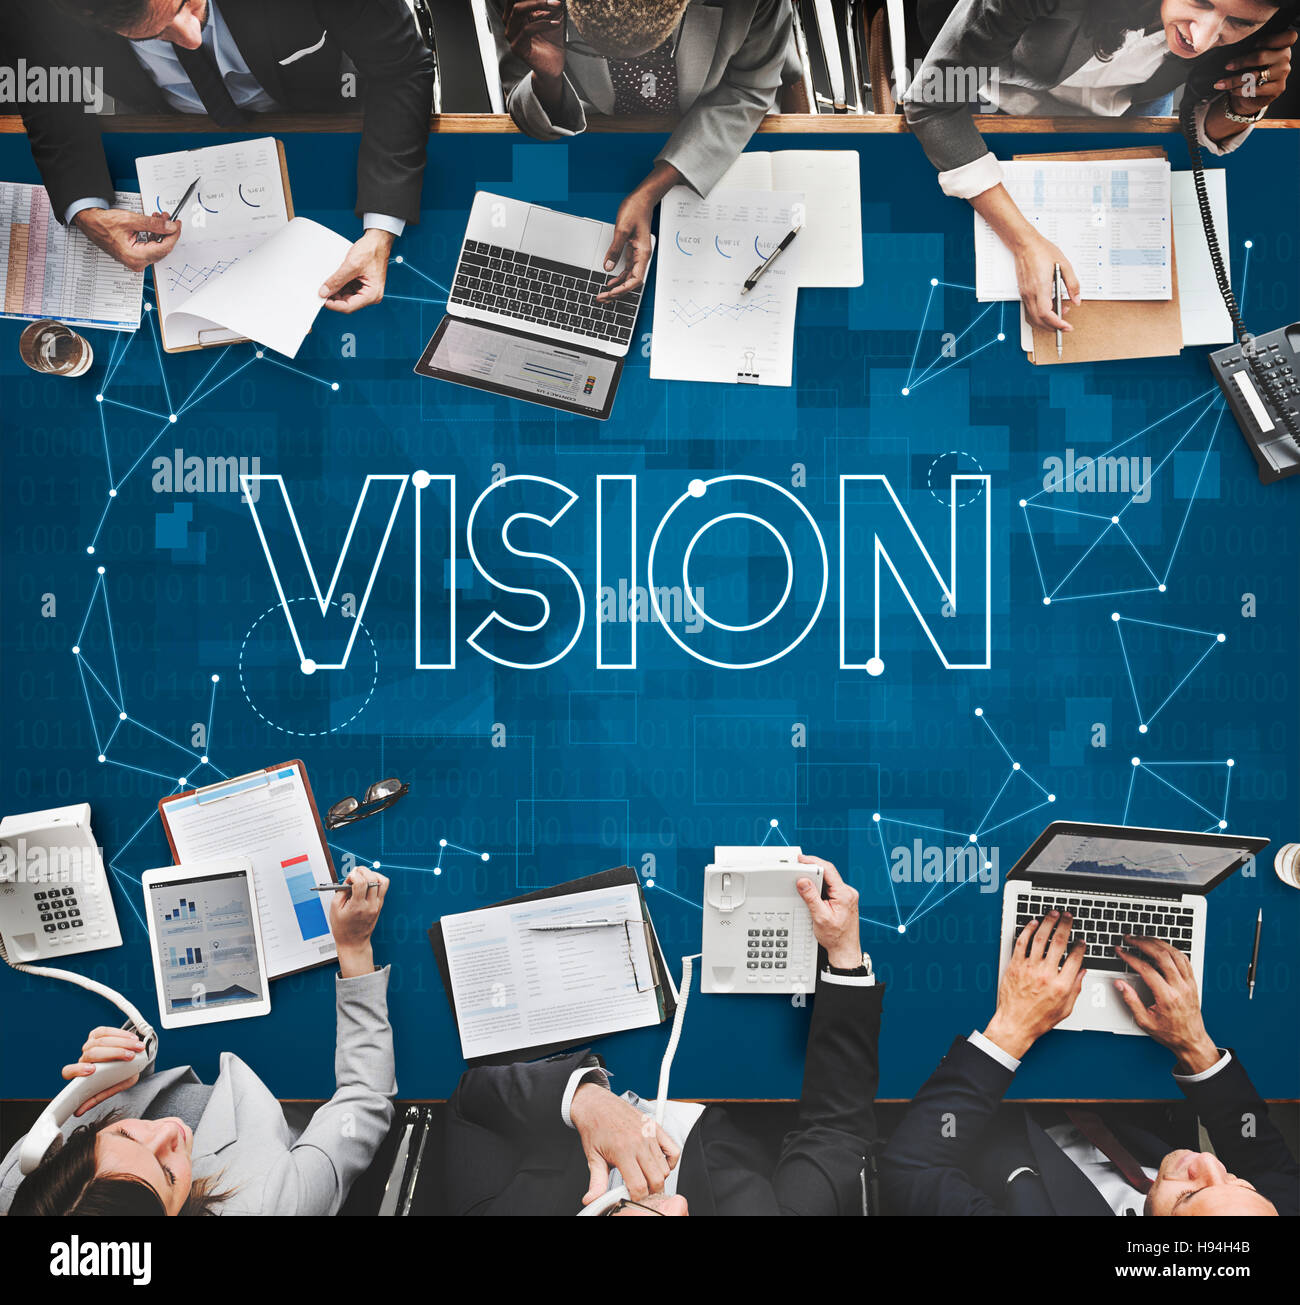 Vision Visibility Observable Noticeably Graphic Concept Stock Photo